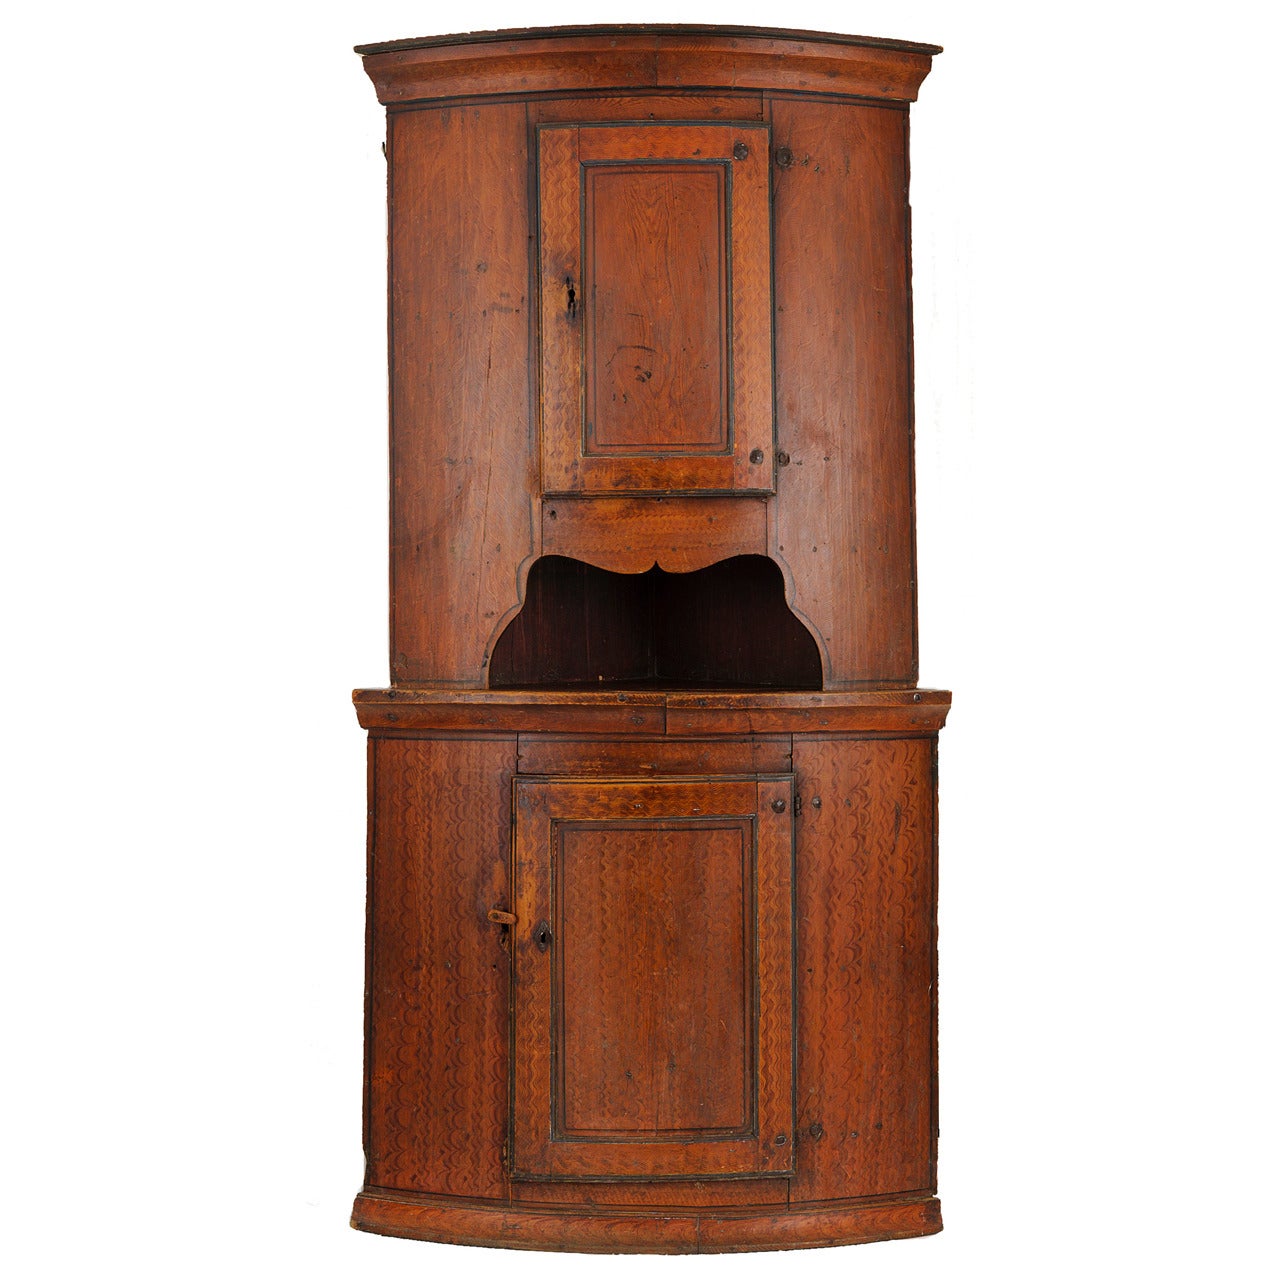 18th Century Corner Cabinet with Original Feather Painted Finish